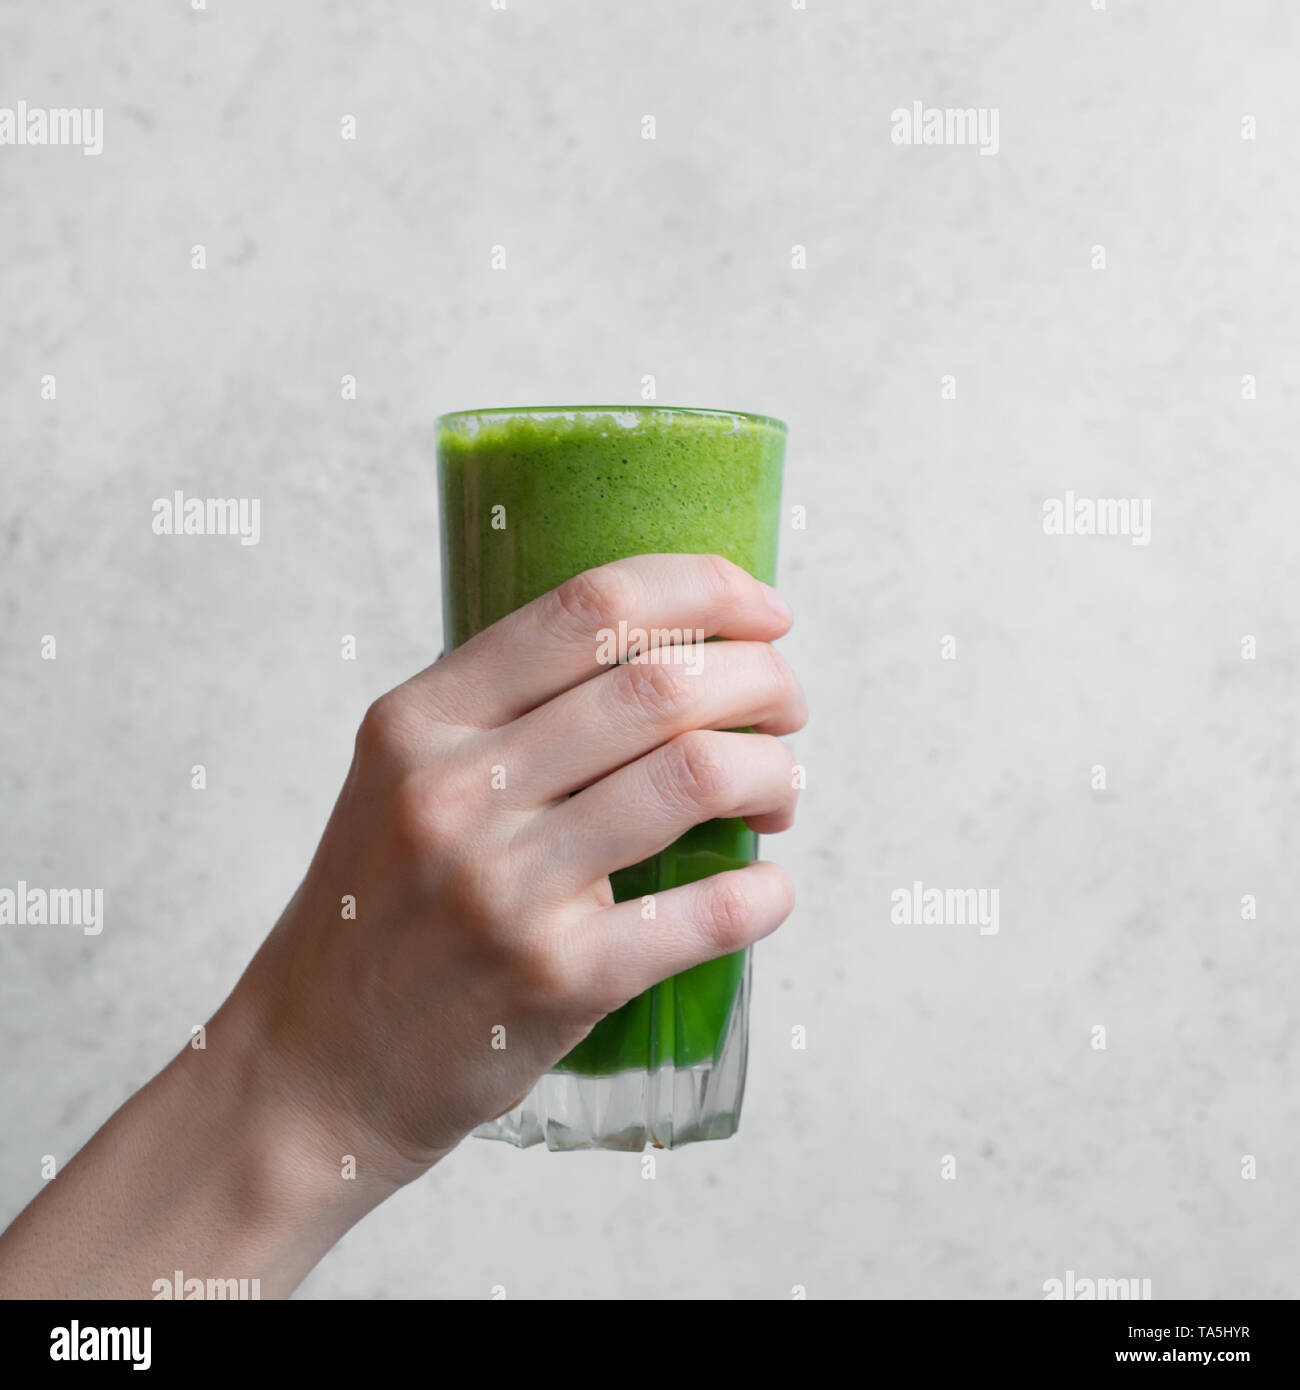 Green smoothie in hand. Female hand holding glass of green spinach detox smoothie, copy space. Stock Photo